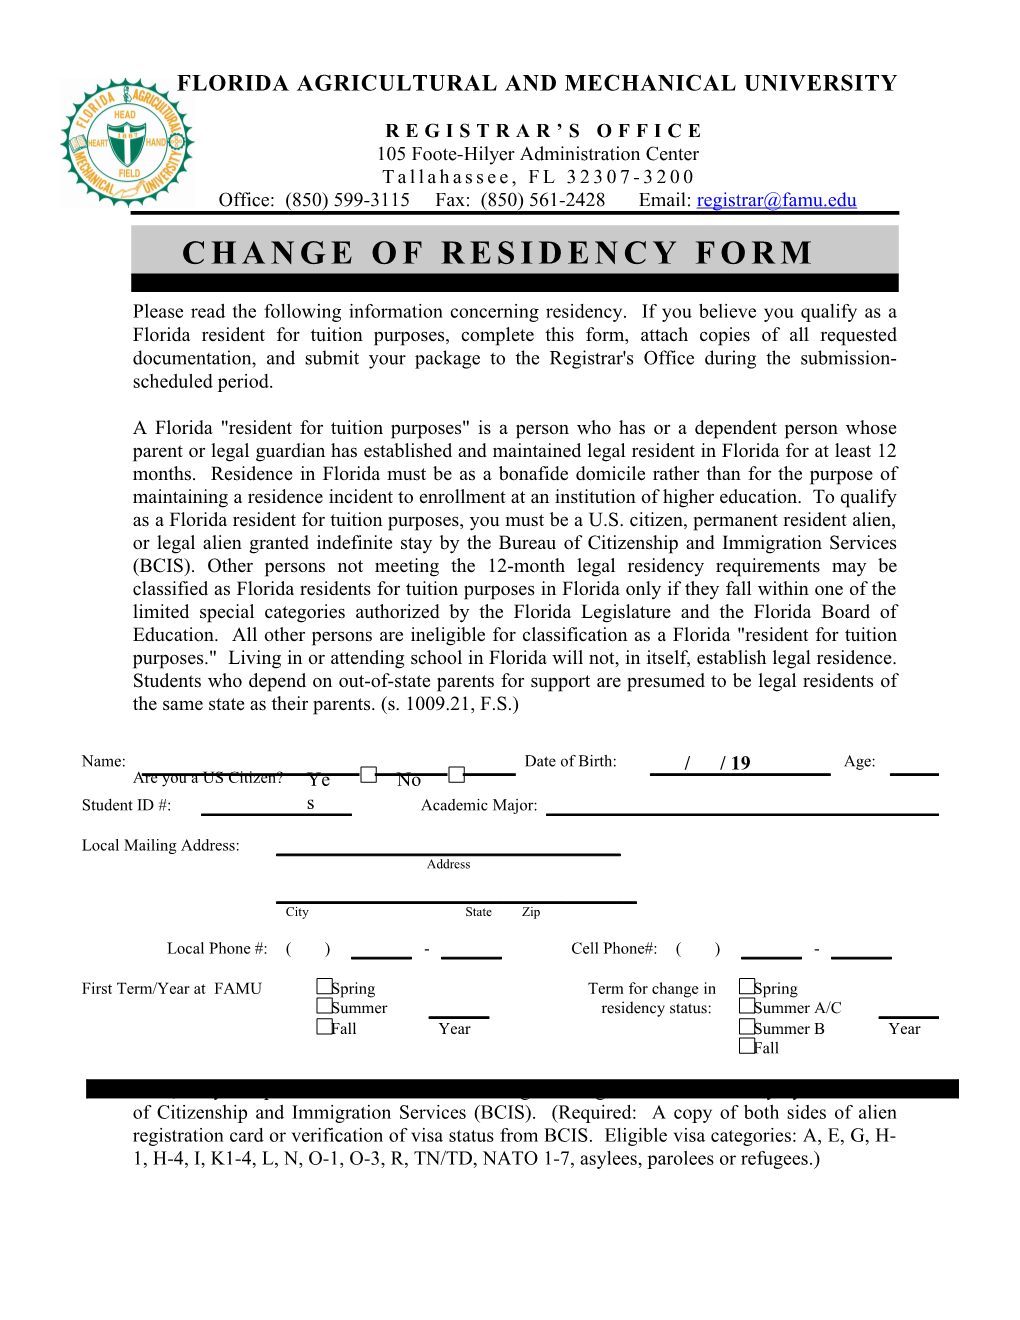 Please Read the Following Information Concerning Residency. If You Believe You Qualify